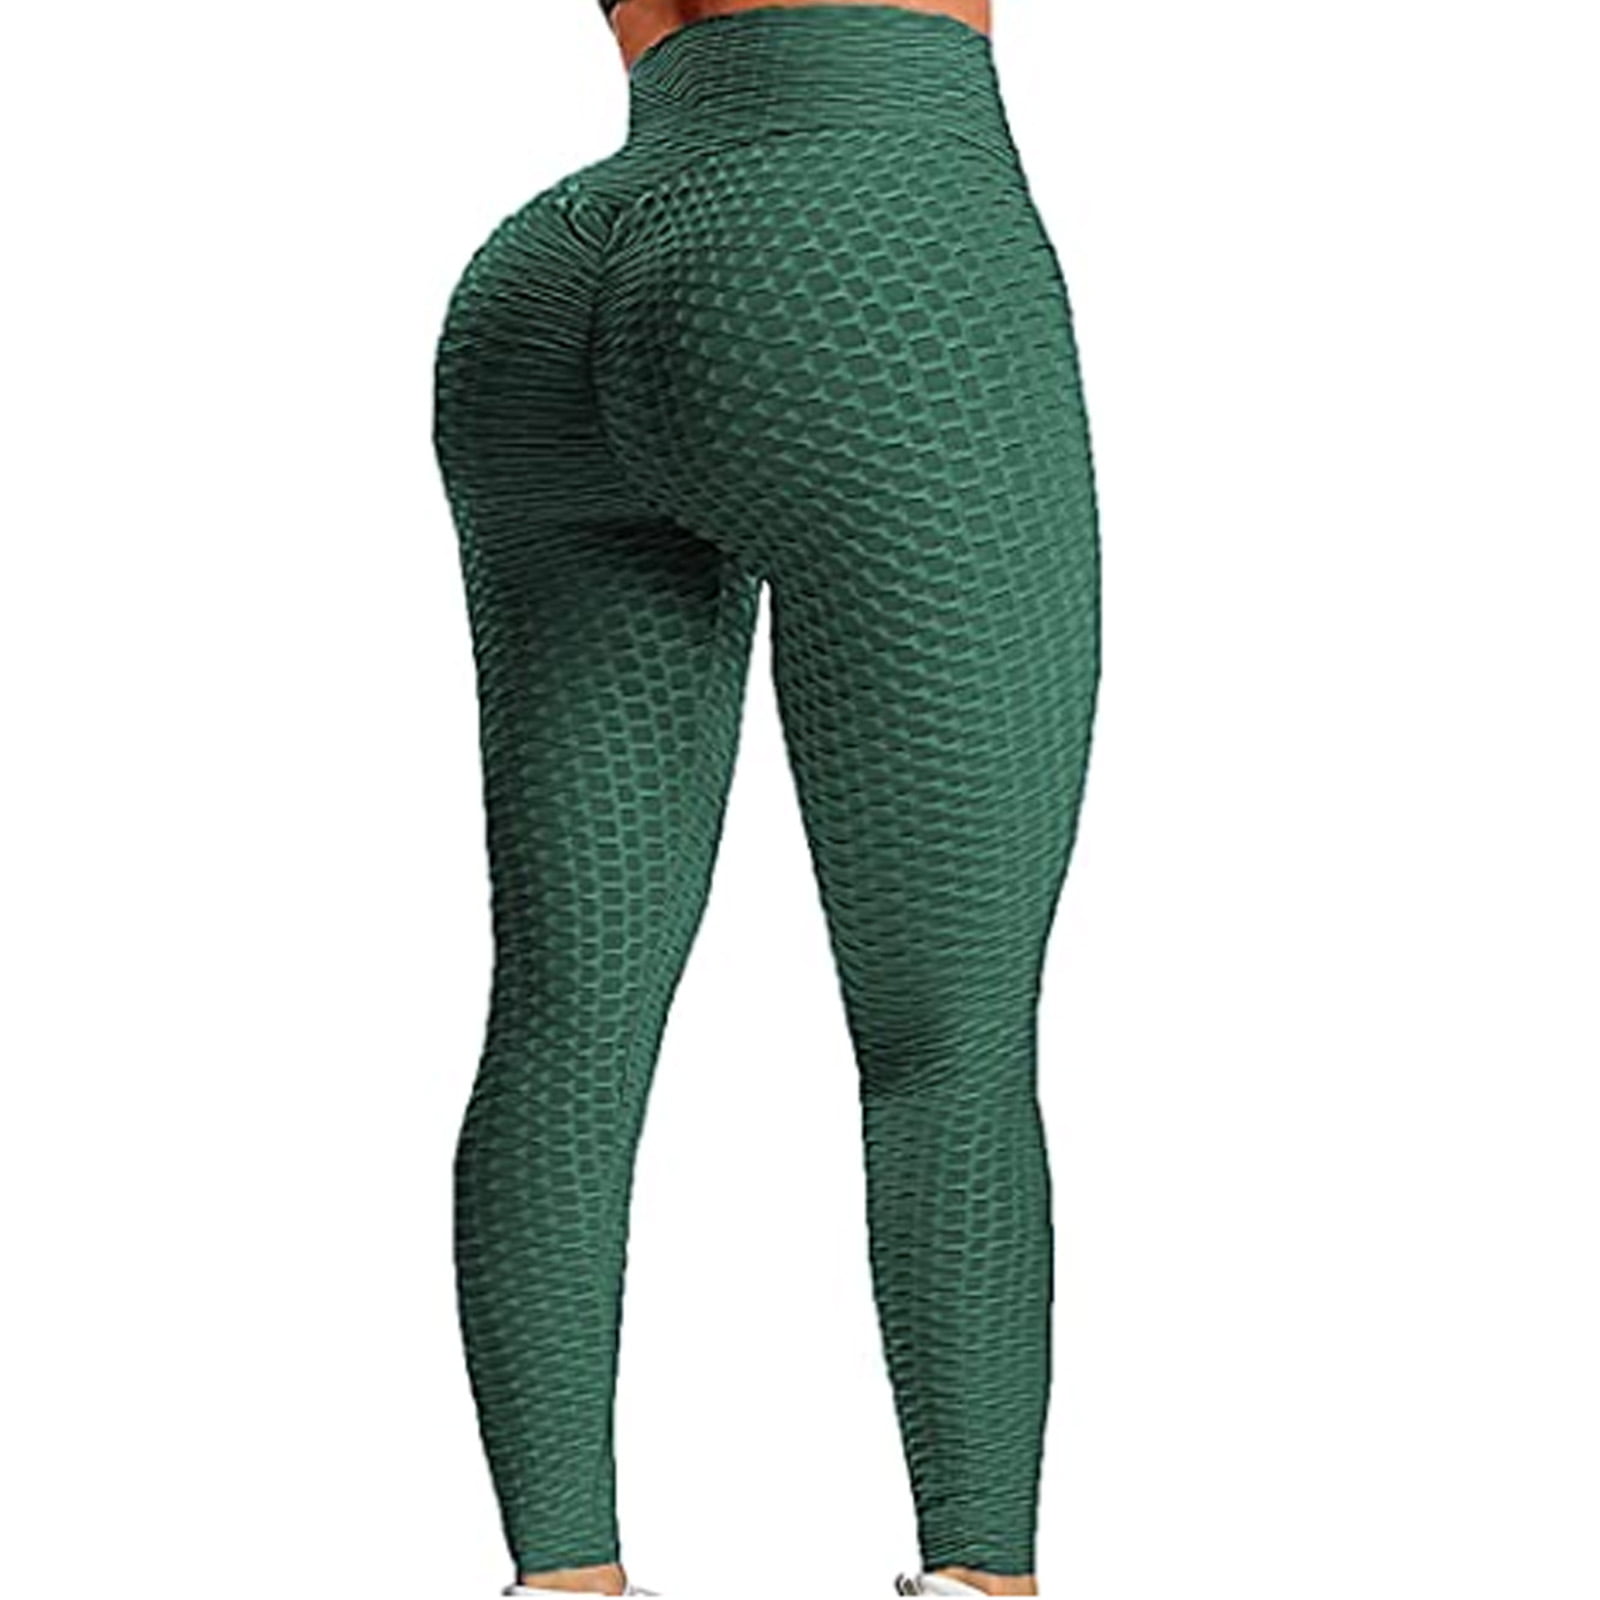 FITTOO ITTOO Womens High Waist Textured Workout Leggings Stripes Booty Scrunch Yoga Pants Ruched Tights